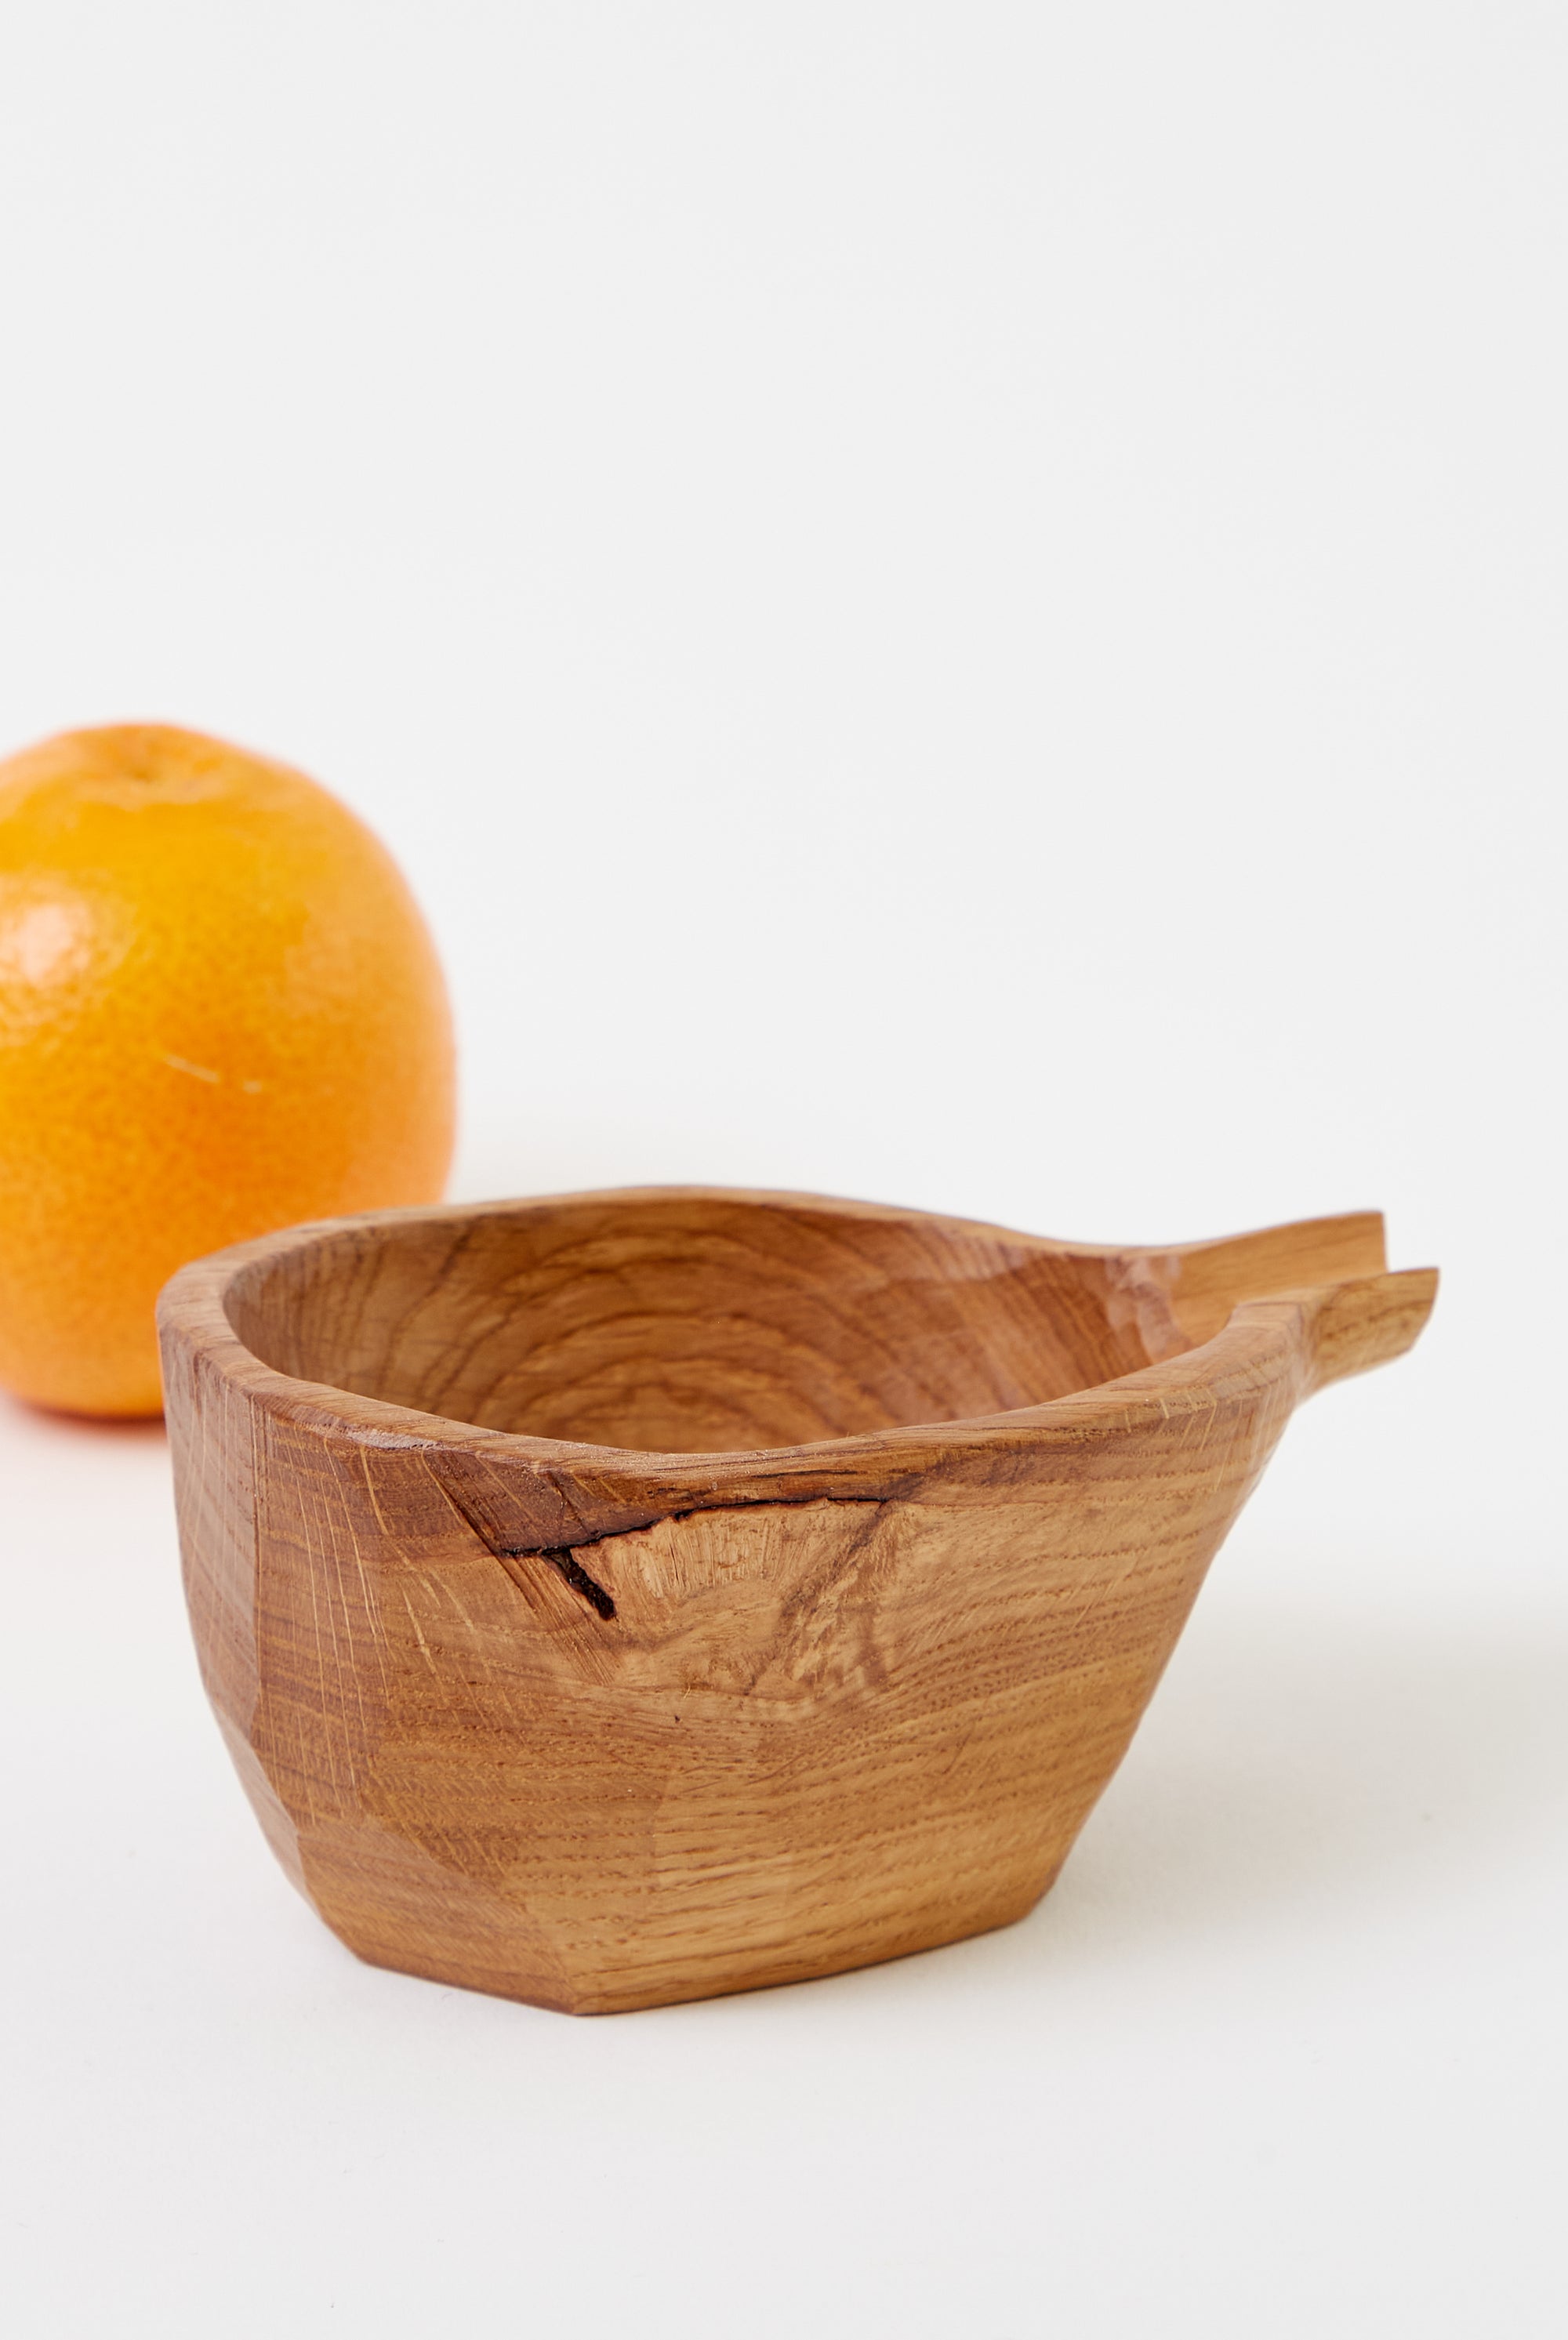 Alex Walshaw Small Pouring Bowl in Reclaimed Wood